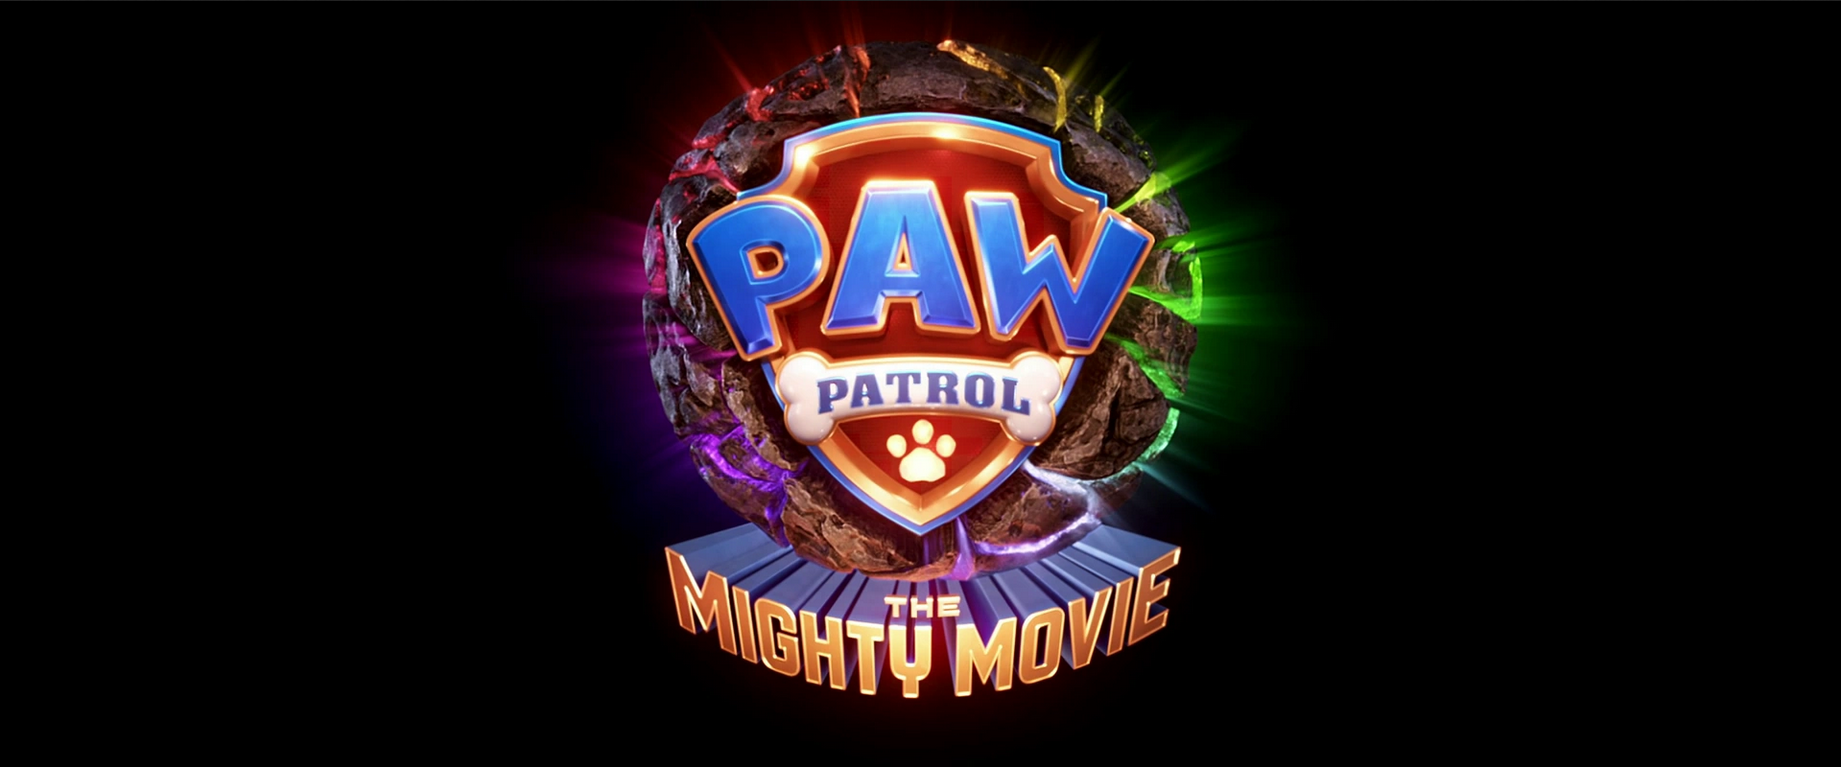 https://static.wikia.nocookie.net/paw-patrol/images/e/e8/PAW_Patrol%2C_The_Mighty_Movie_title_card.png/revision/latest?cb=20231107231003